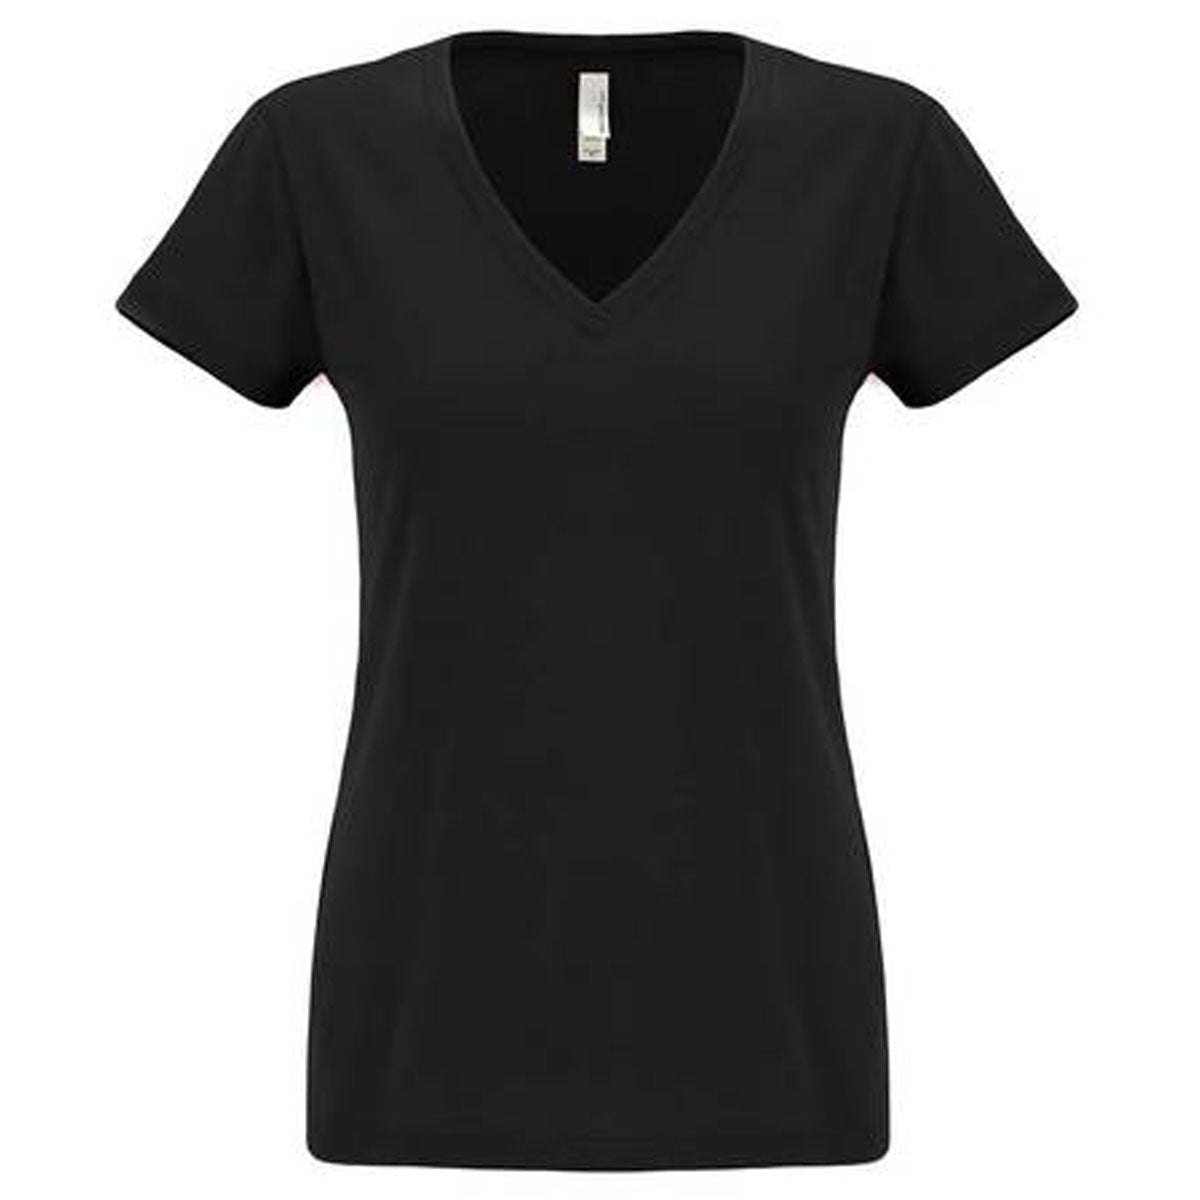 Sorry Can't Softball Bye - Black Tee - Southern Grace Creations